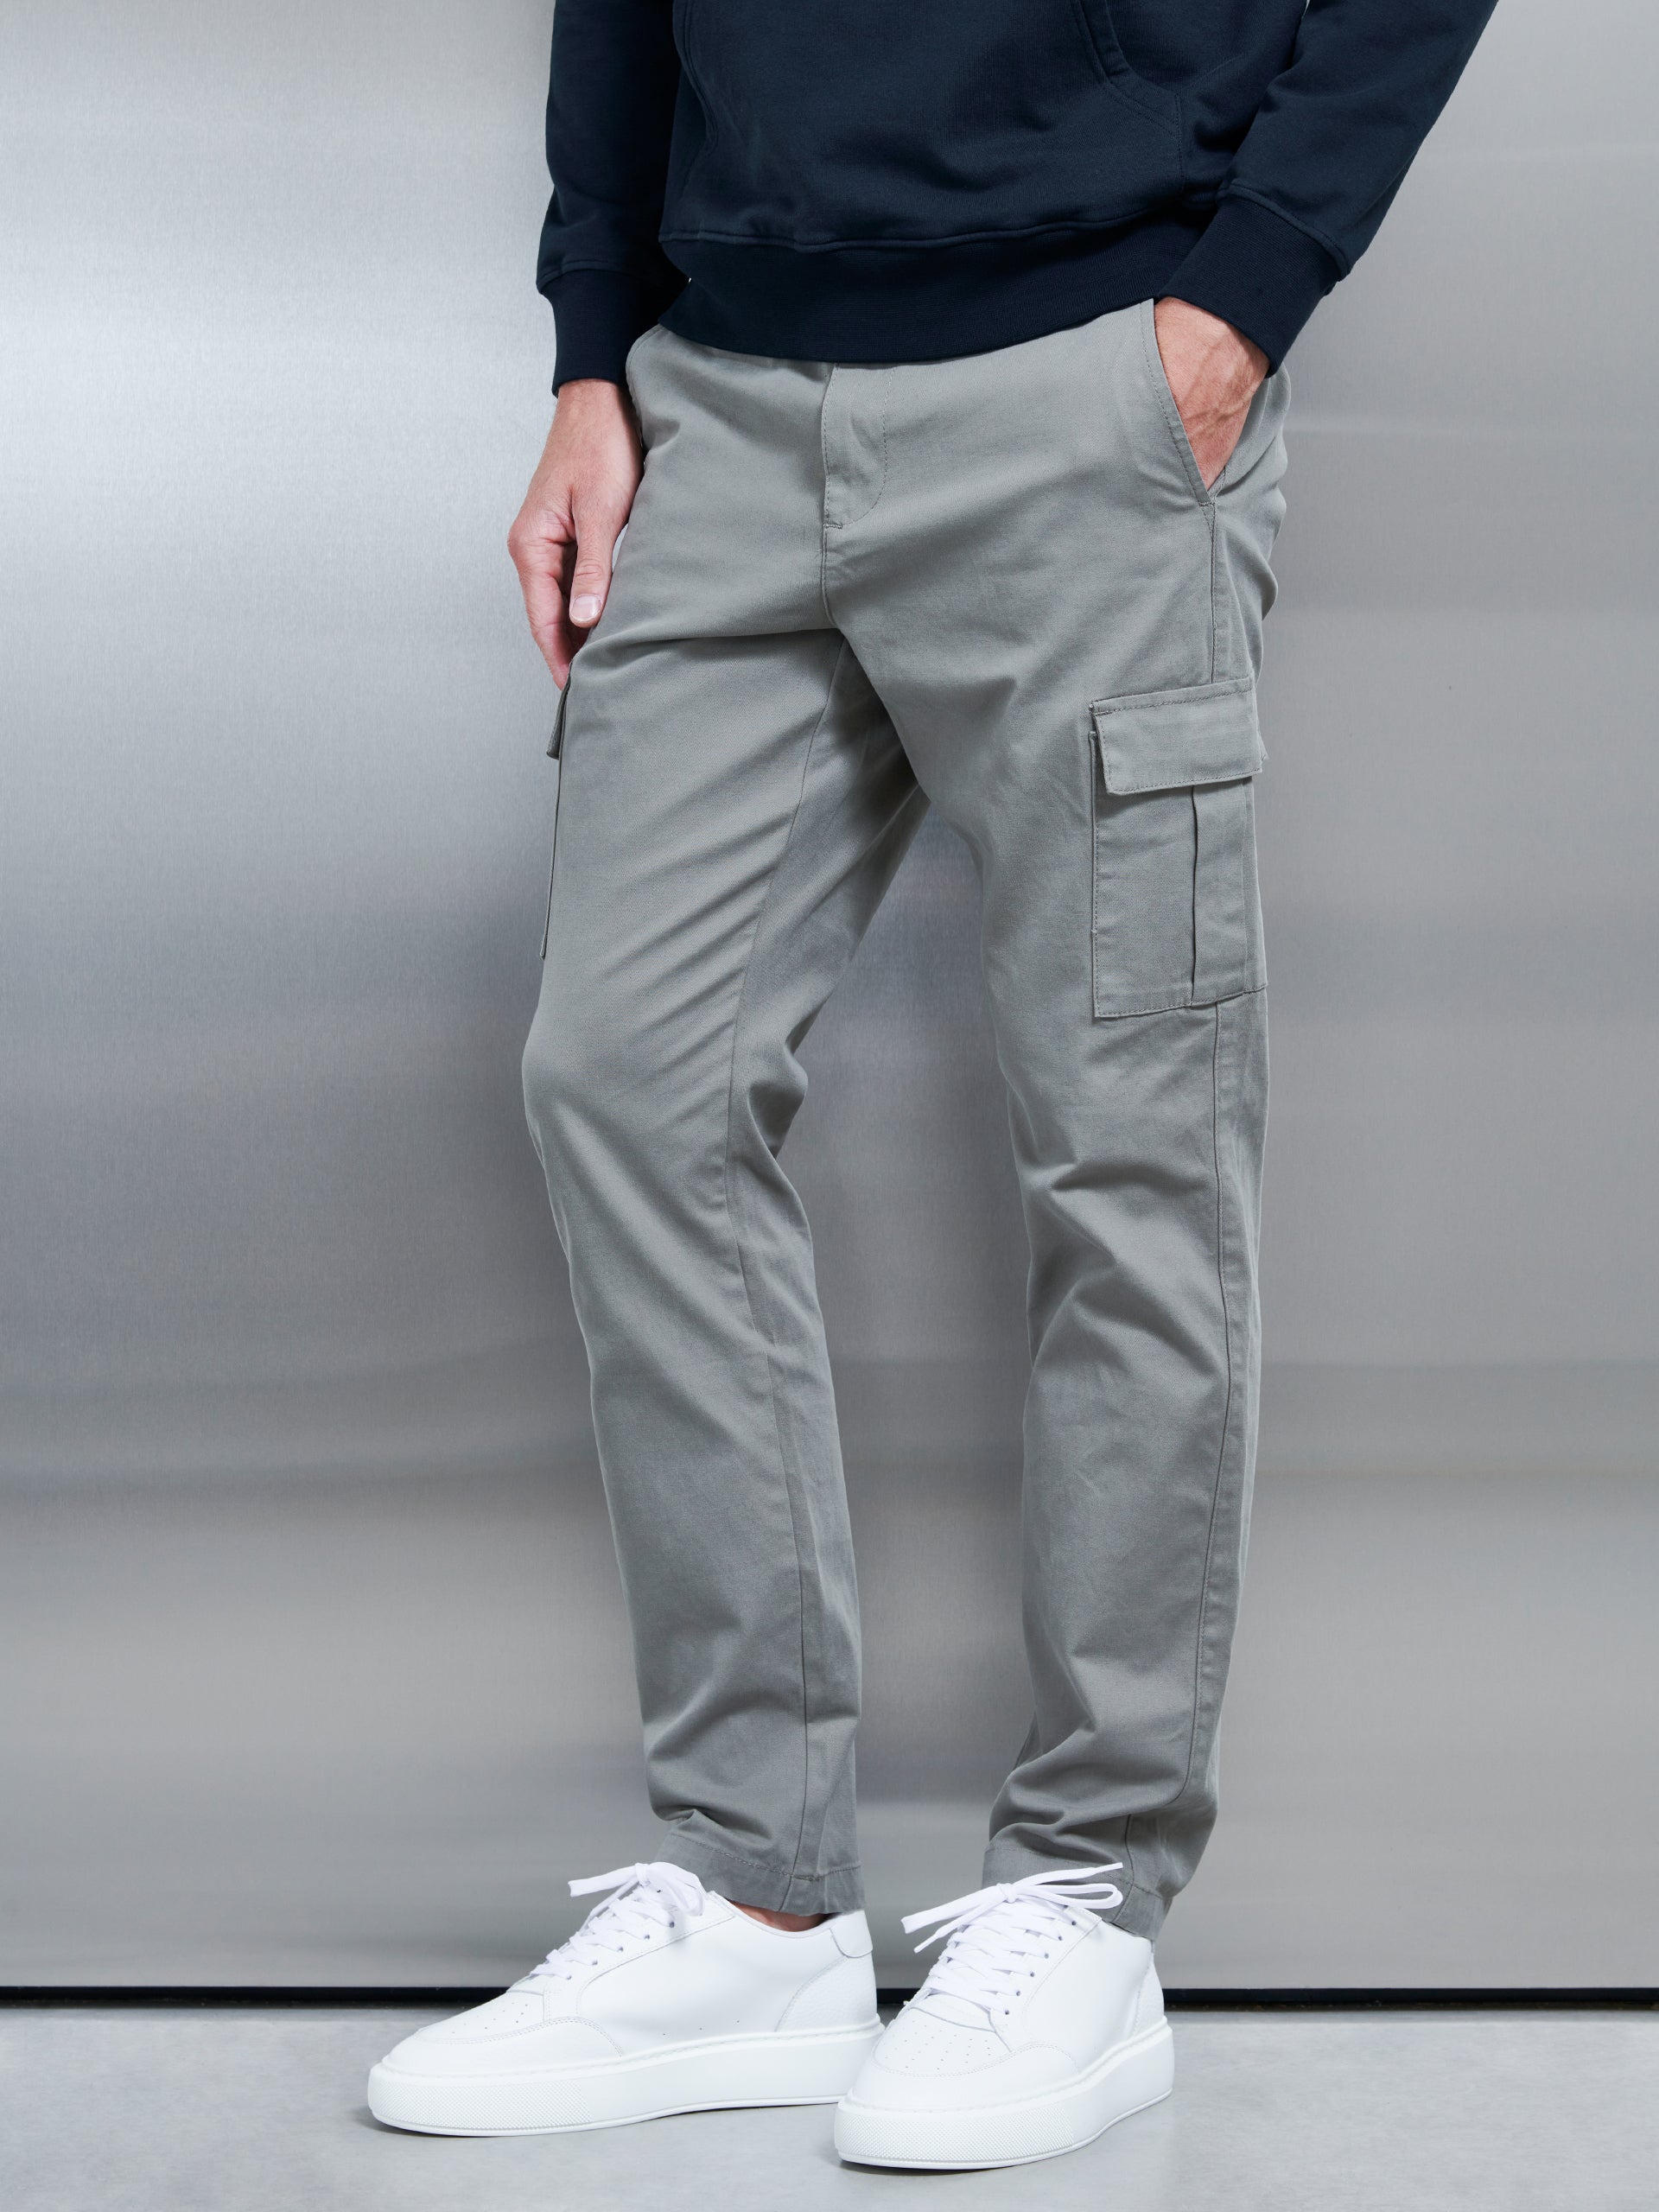 Men's DuluthFlex Fire Hose Fleece-Lined Relaxed Fit Cargo Work Pants |  Duluth Trading Company